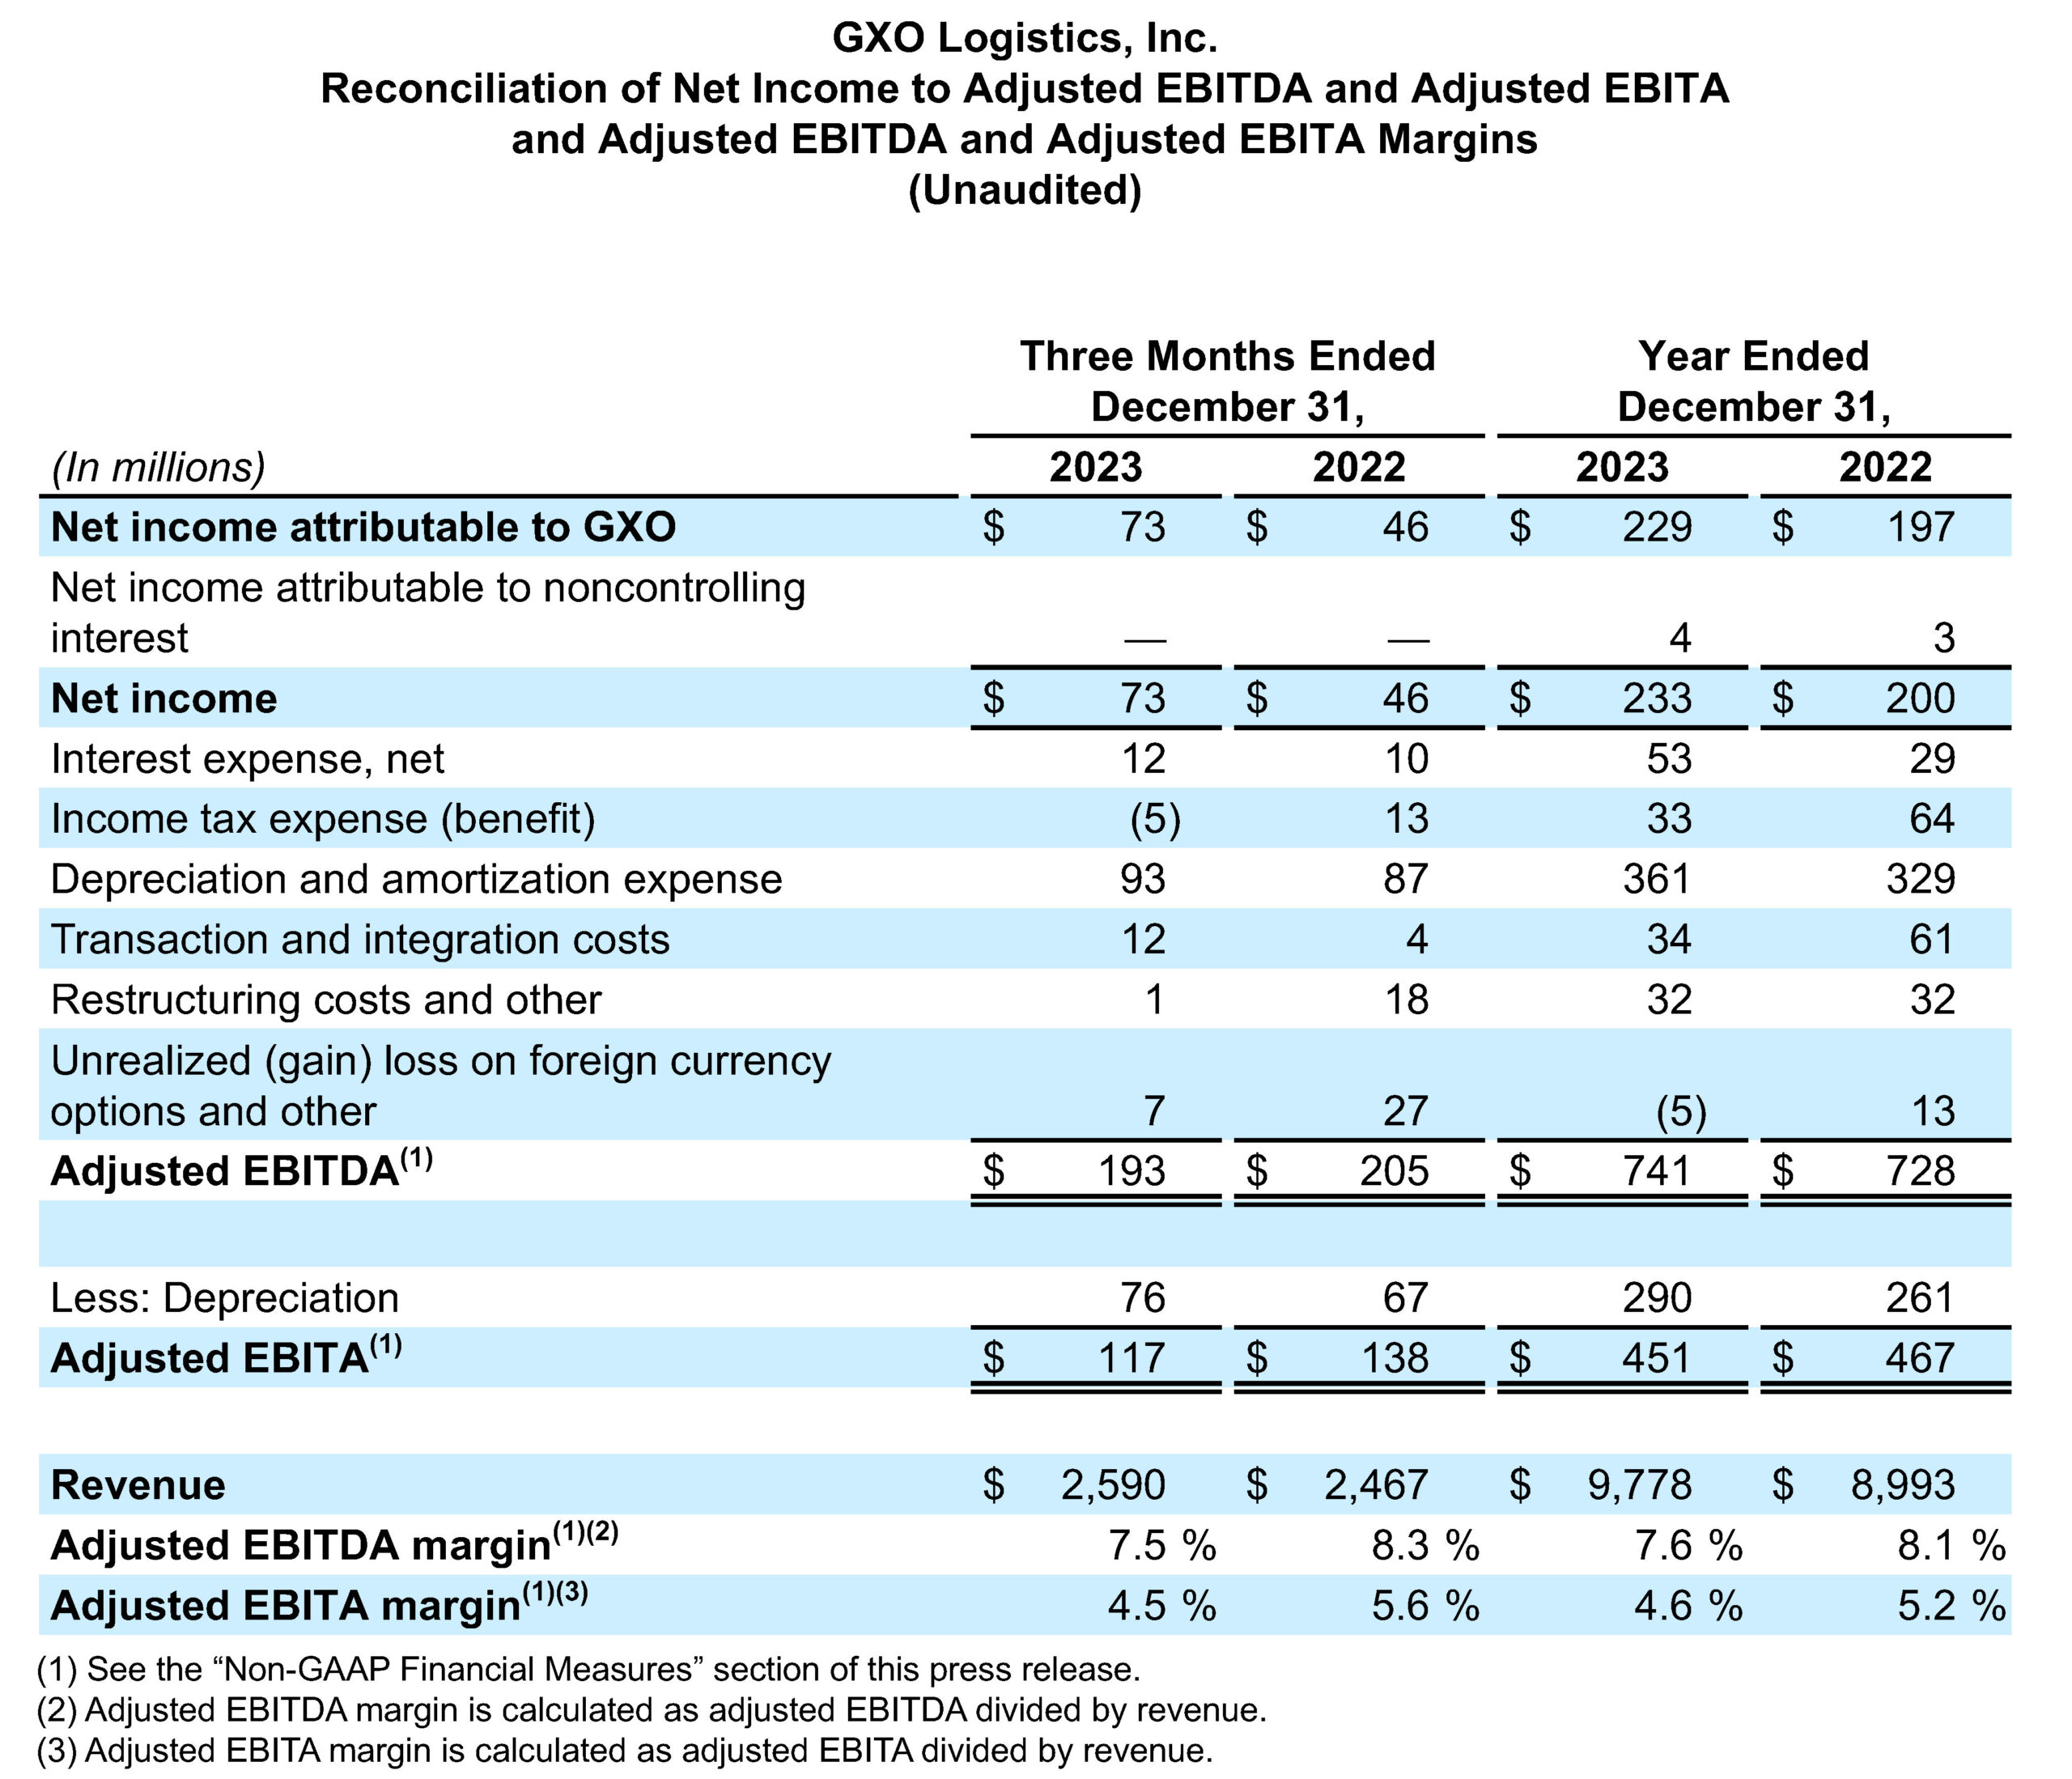 Reconciliation of Net Income to Adjusted EBITDA and Adjusted EBITA and Adjusted EBITDA and Adjusted EBITA Margins